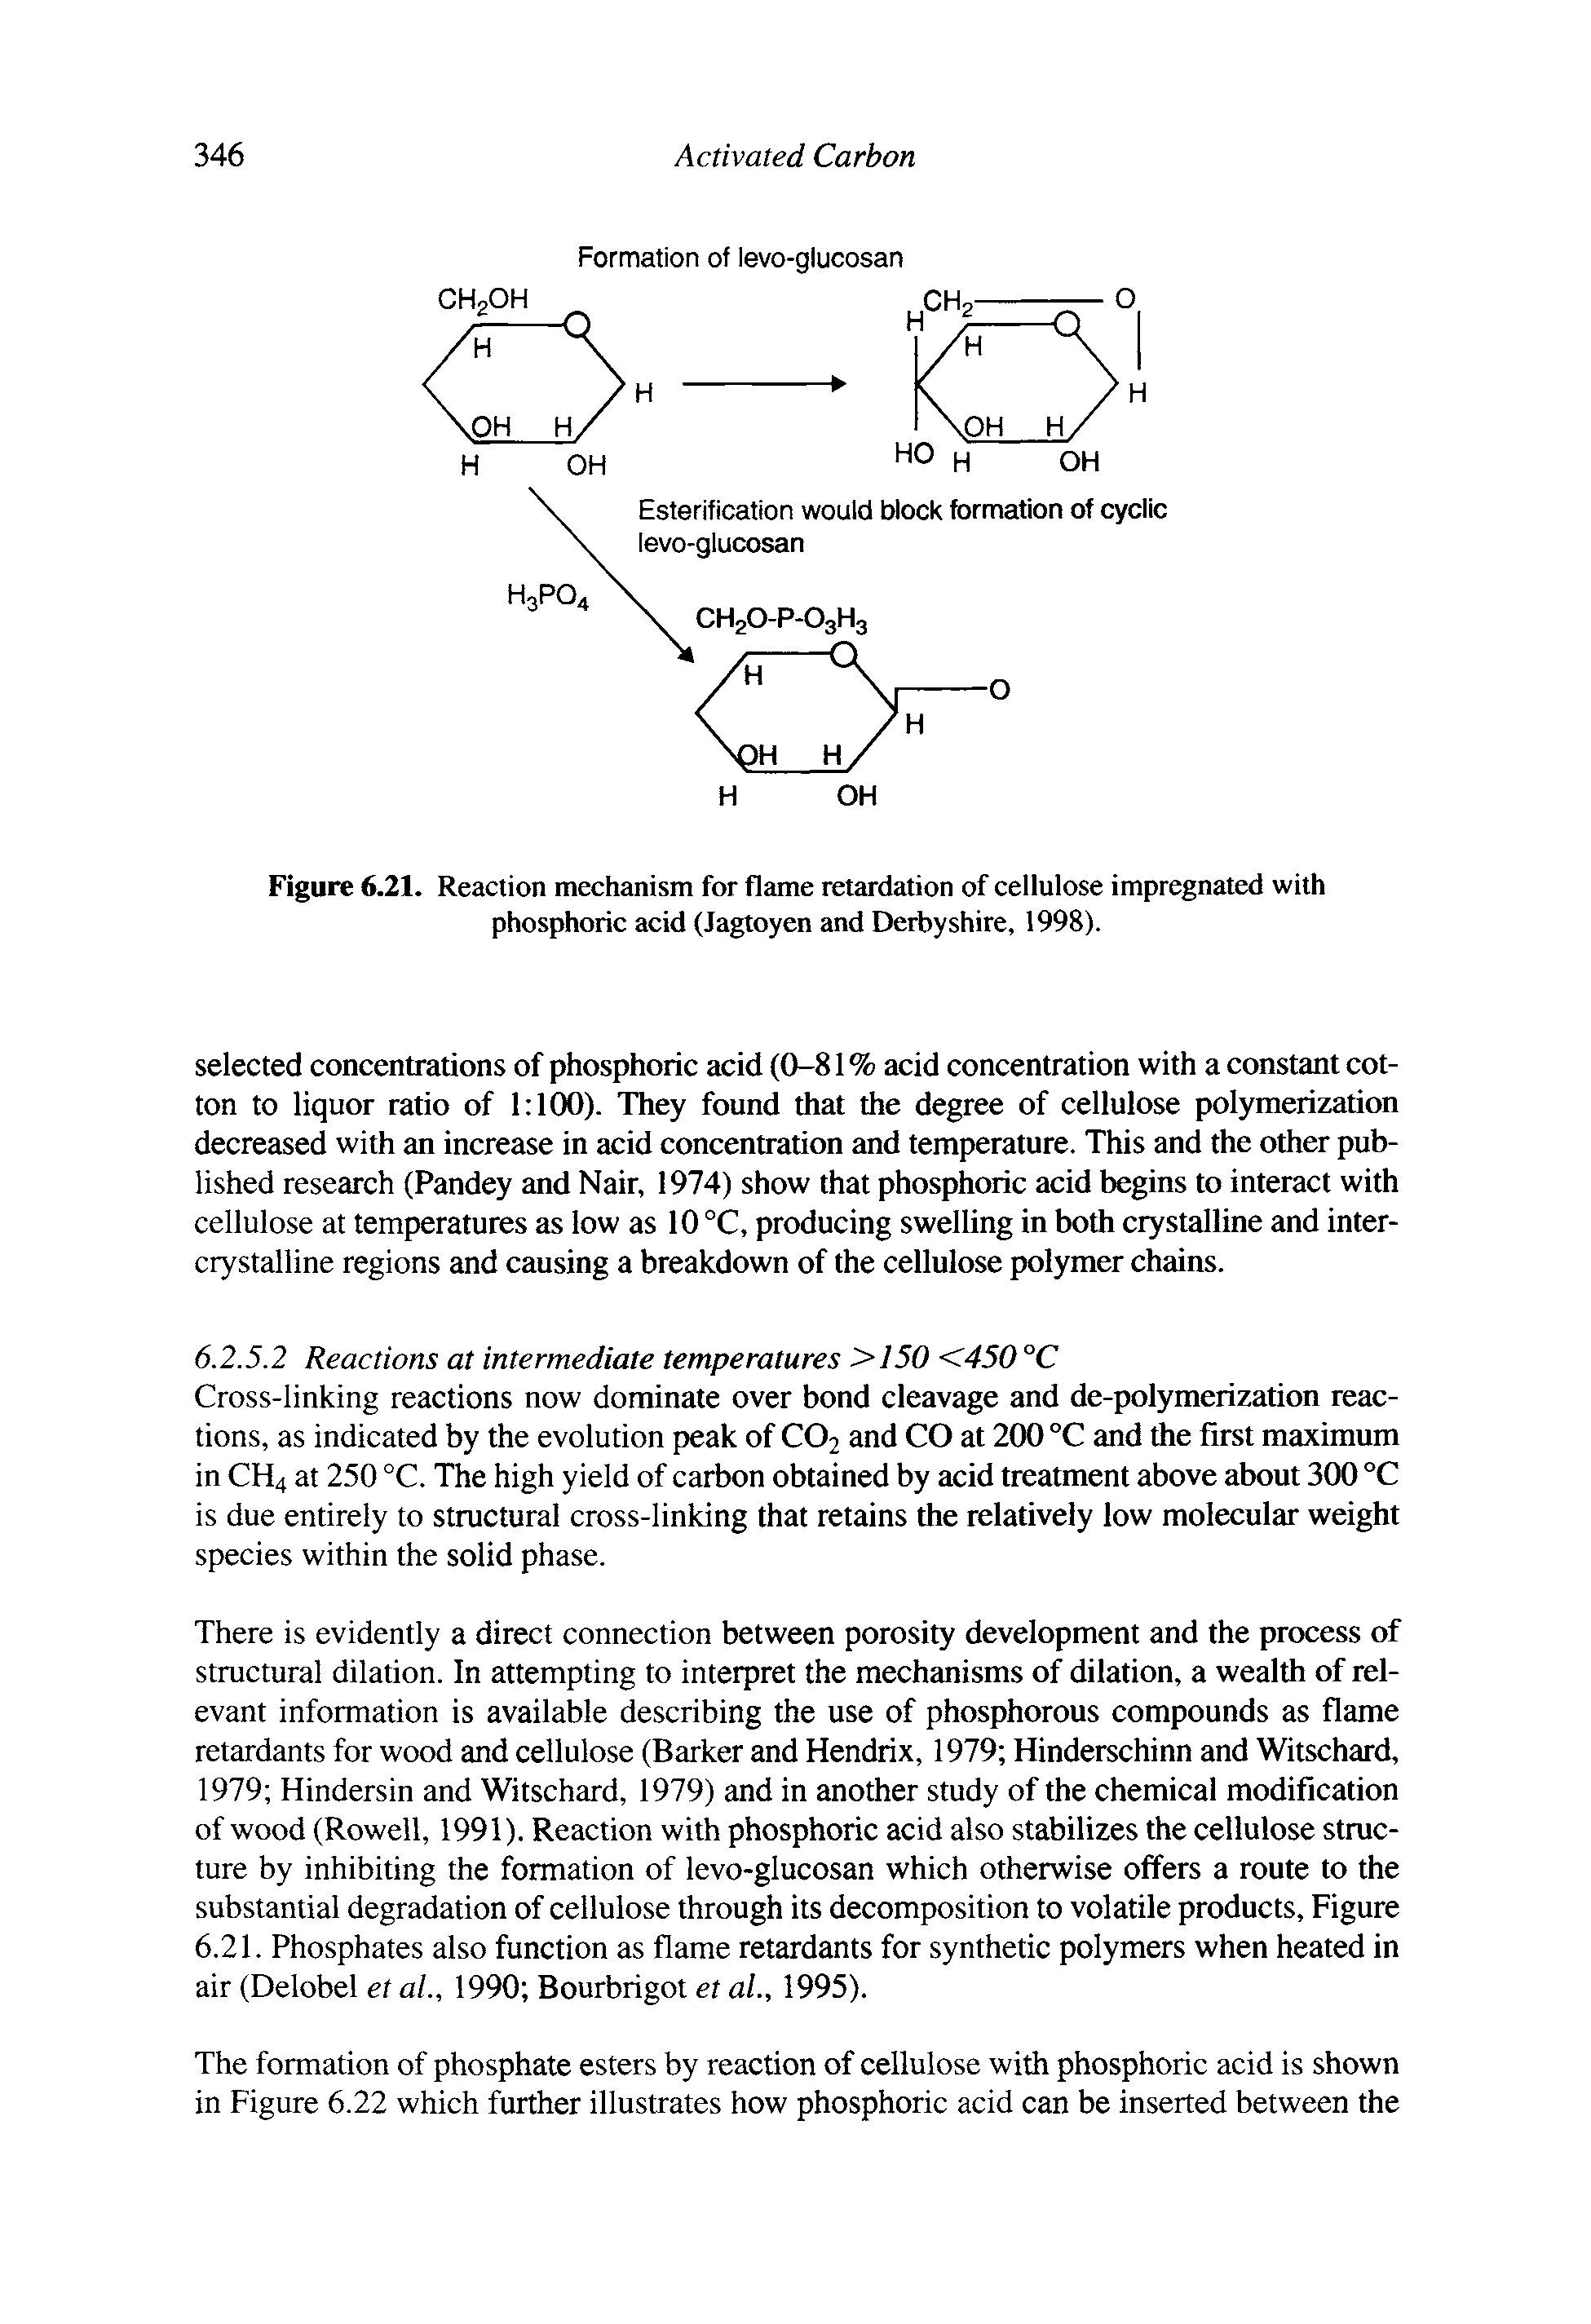 Figure 6.21. Reaction mechanism for flame retardation of cellulose impregnated with phosphoric acid (Jagtoyen and Derbyshire, 1998).